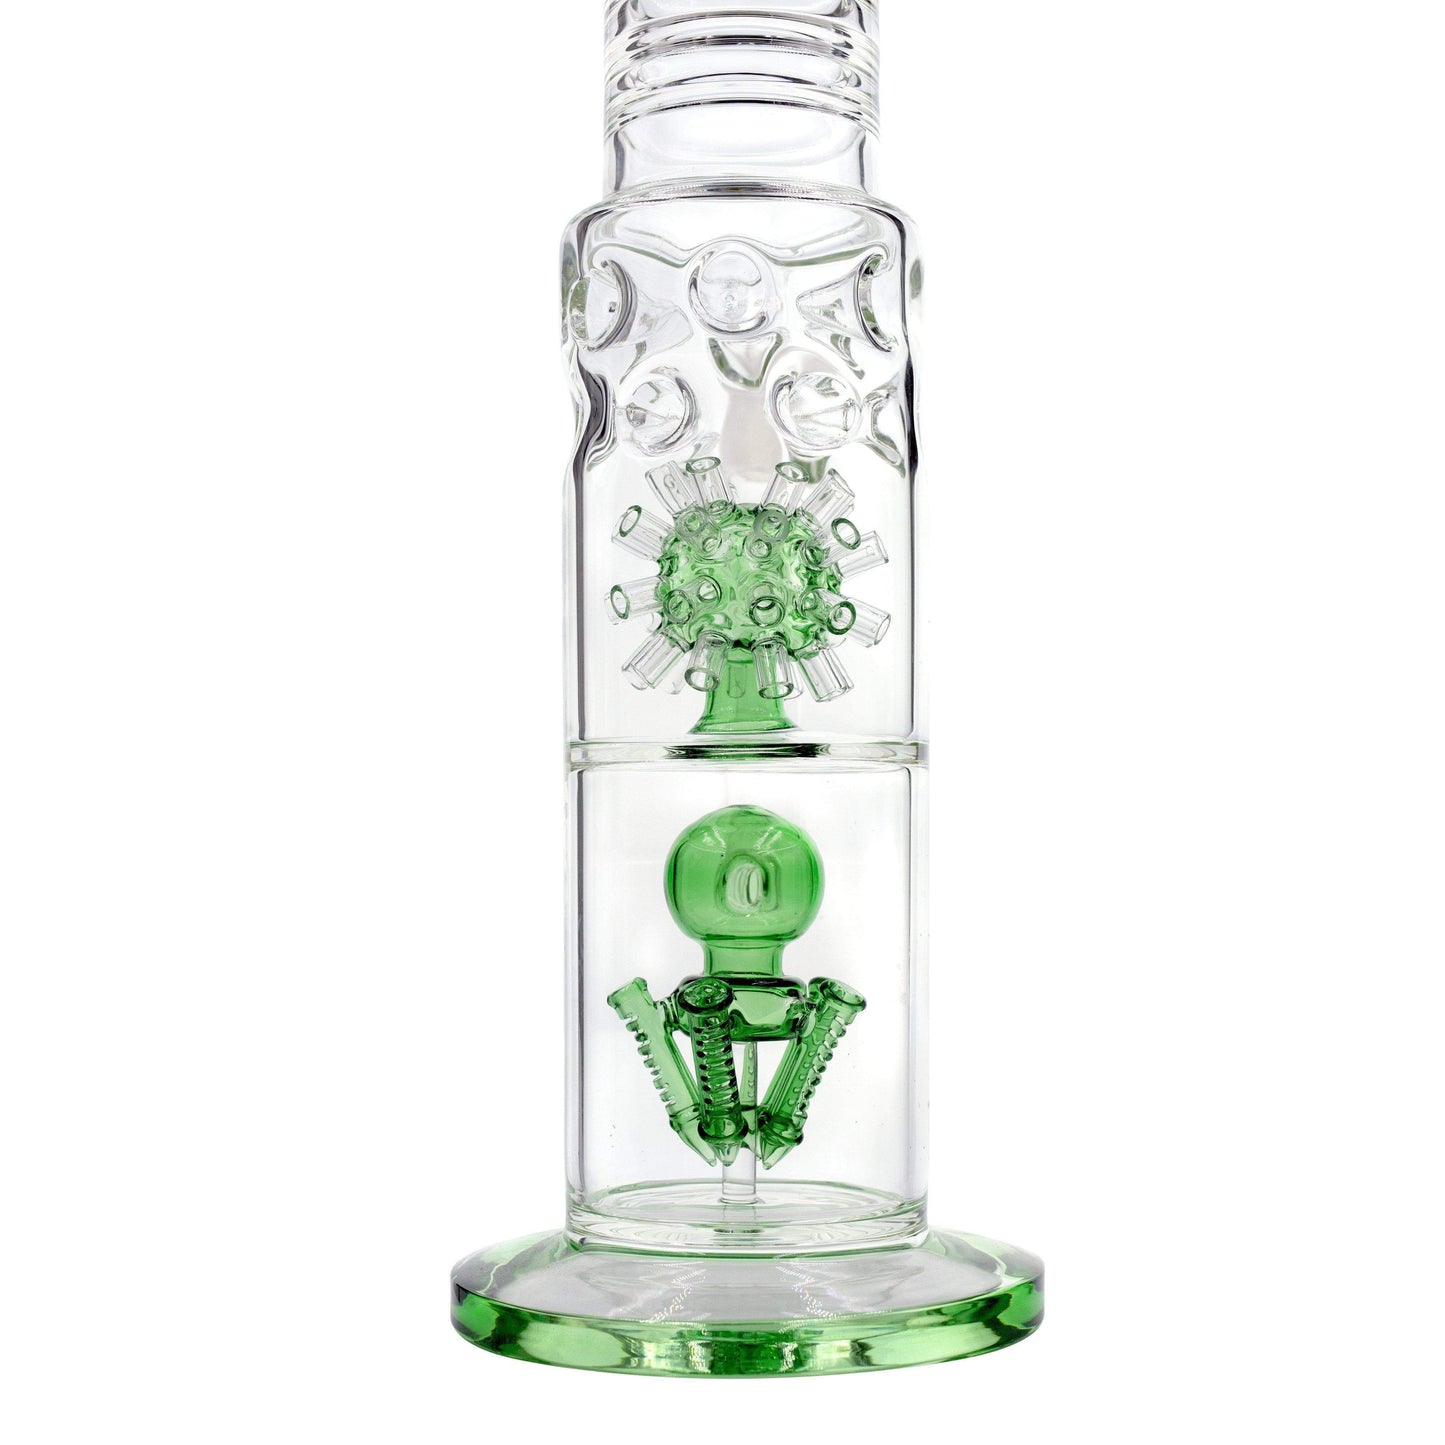 Green Huge 19-inch glass bong close up on with 2 percs unique diffision morning star perc unique design sturdy base